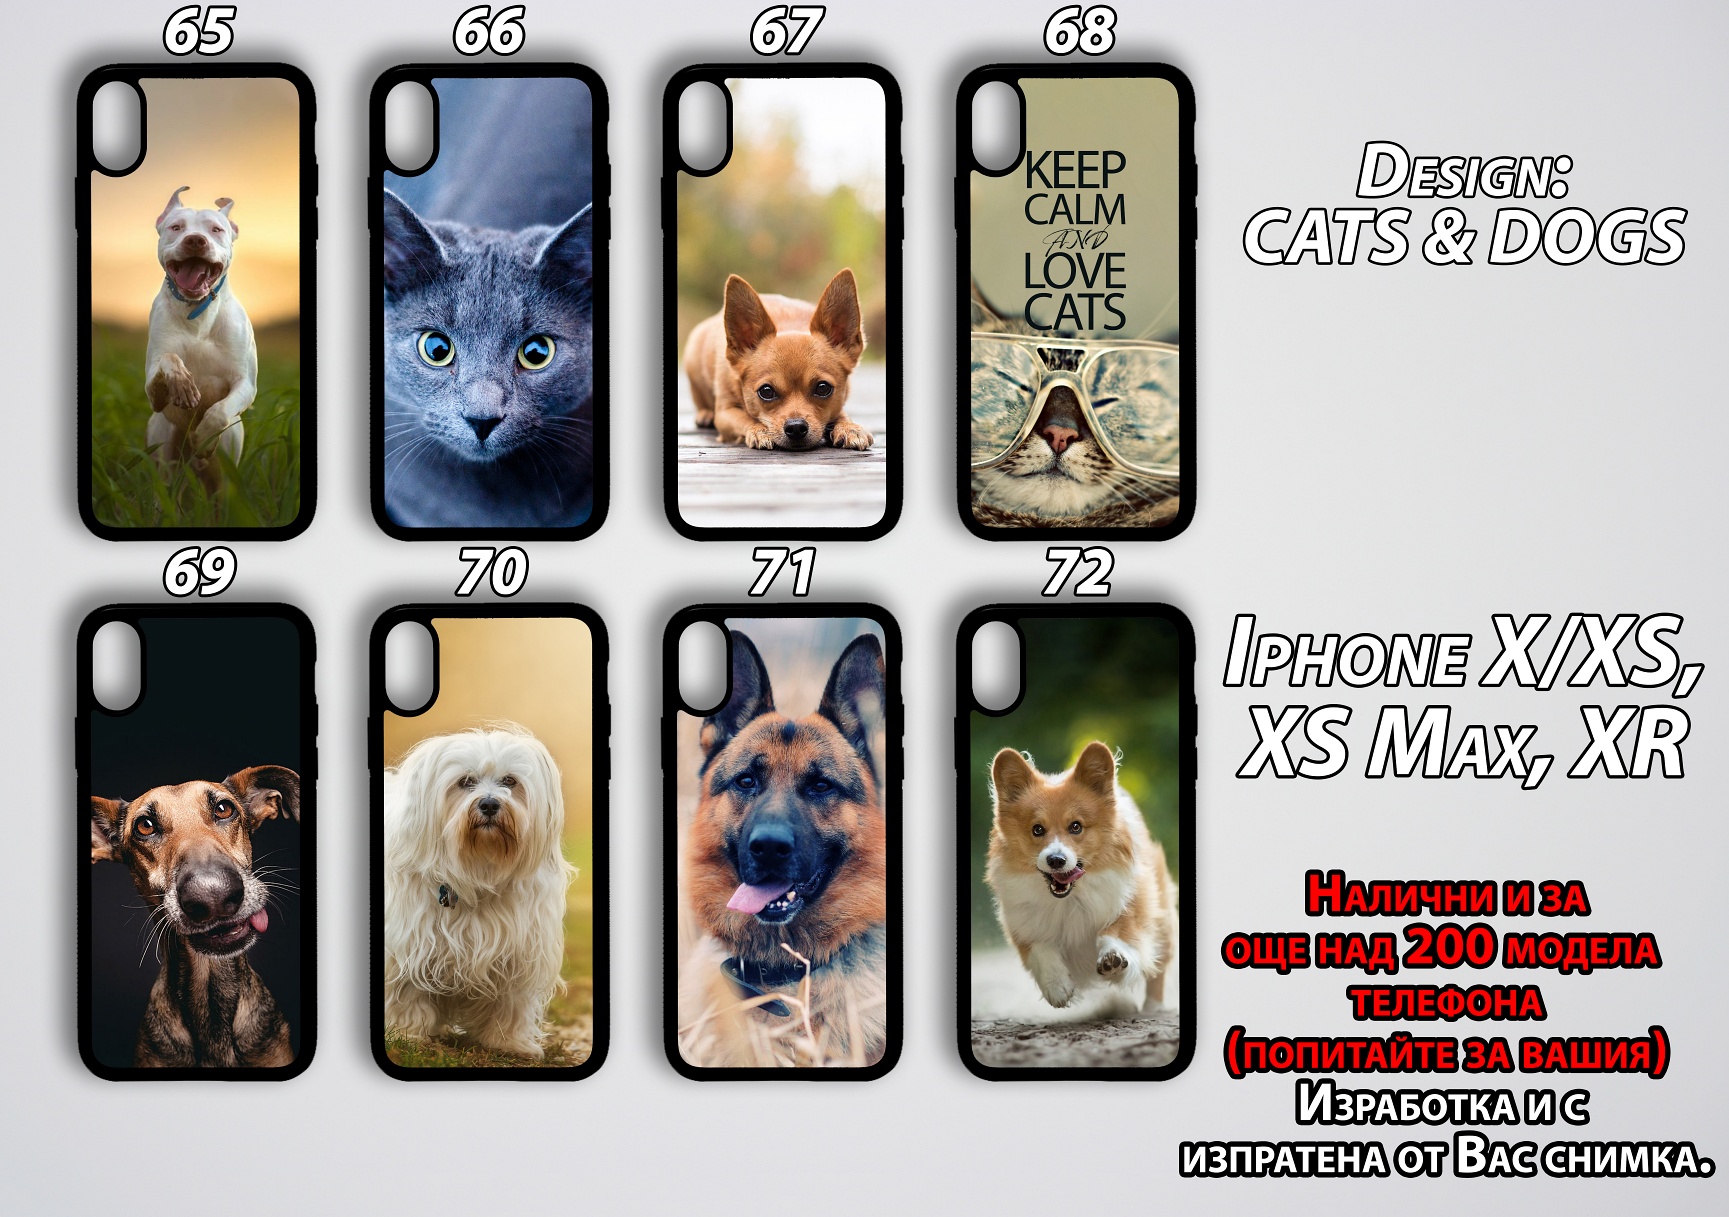 mobile phone cases NEW-Cats-and-Dogs 65